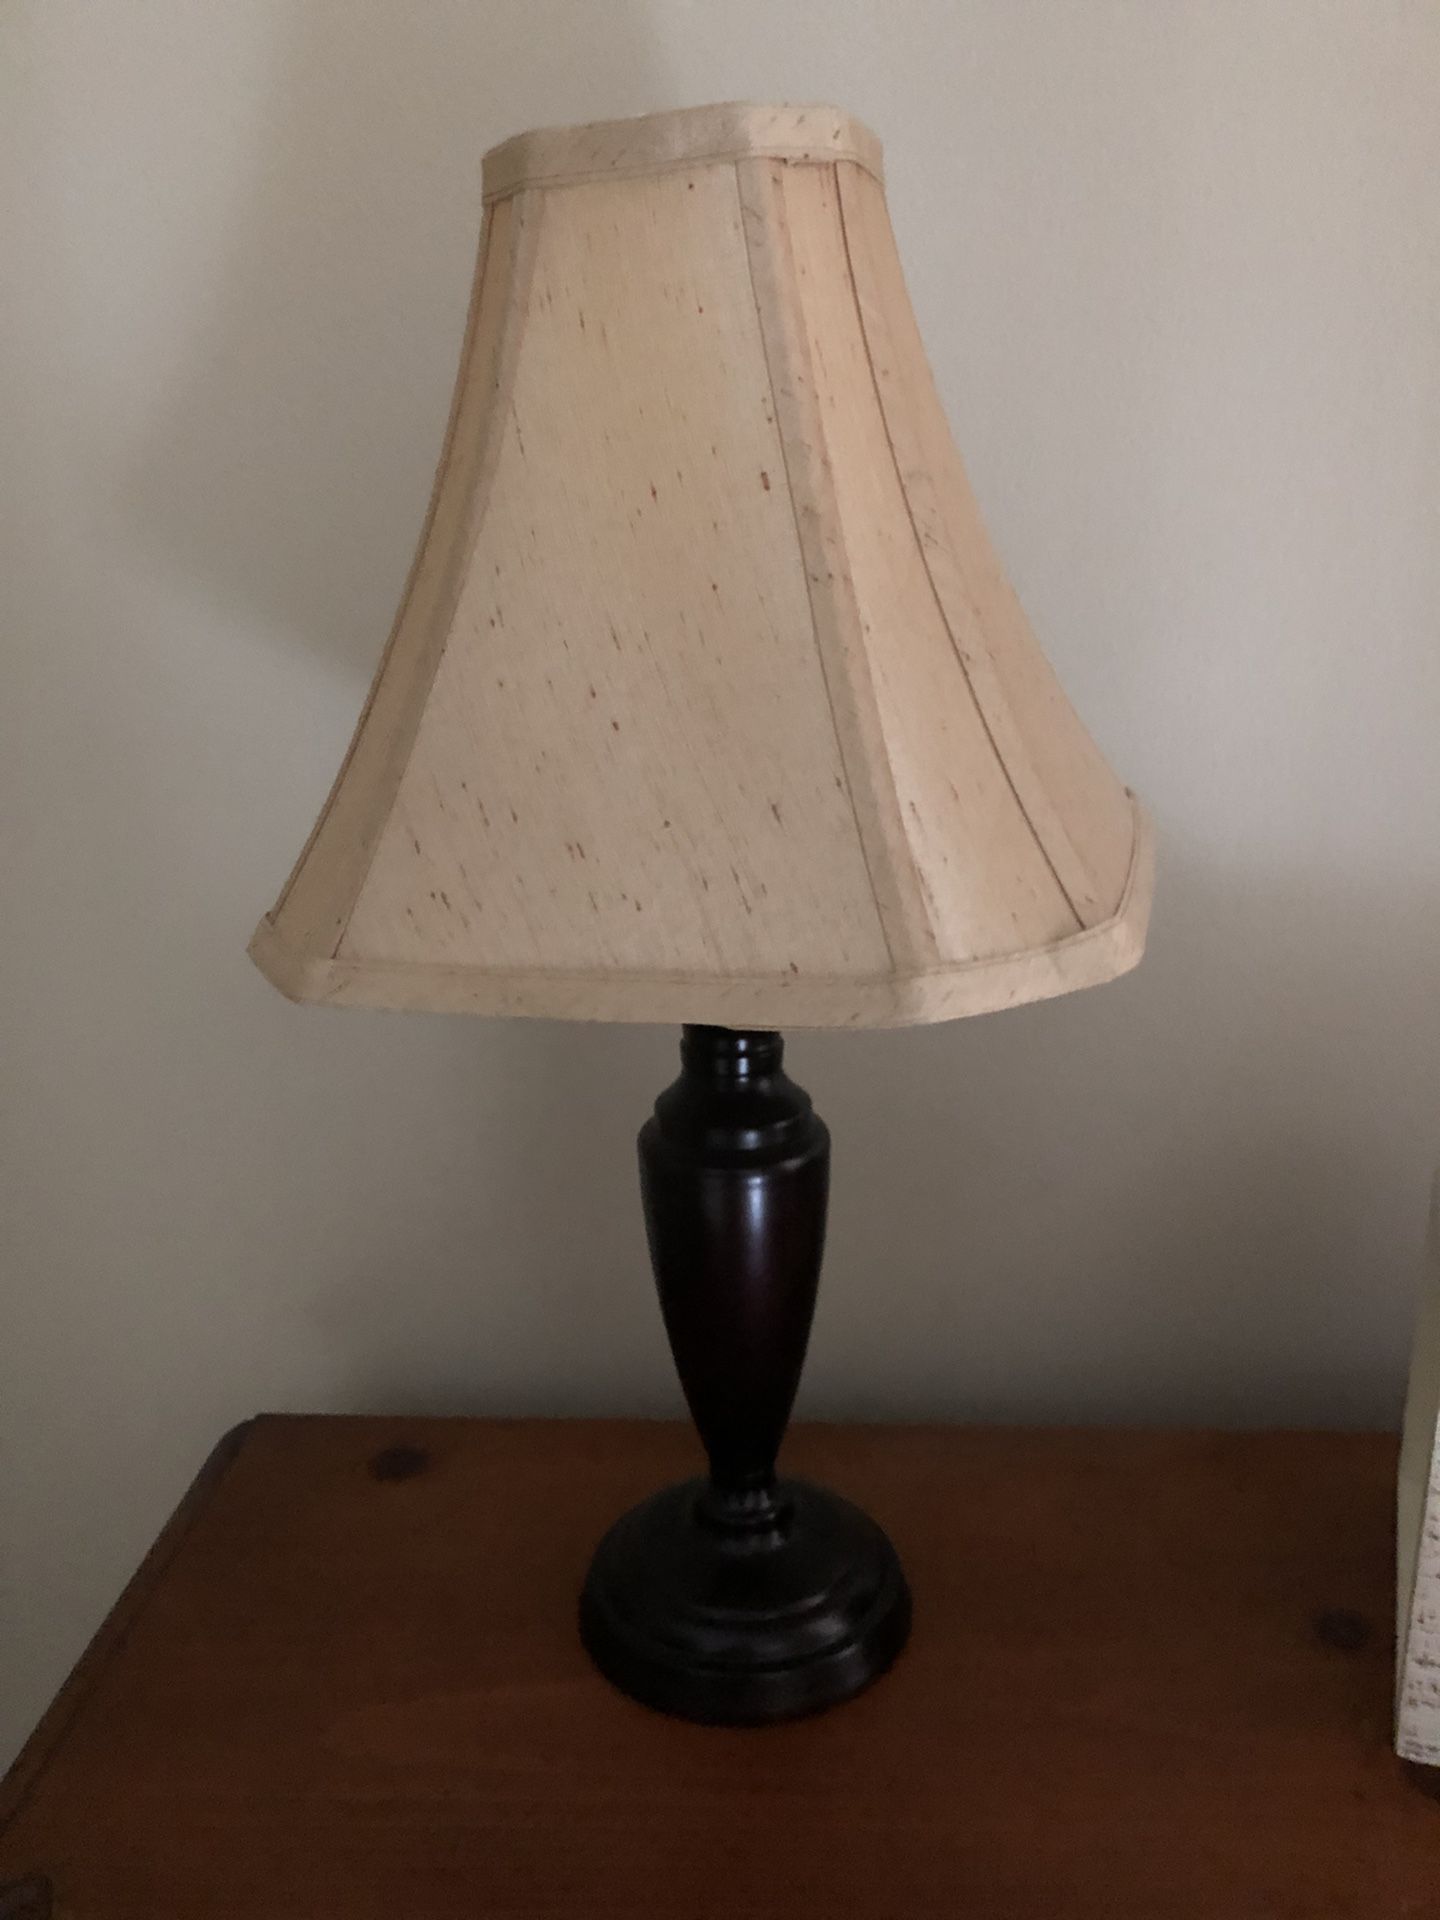  Lamp Great Condition (Table, Desk, Kitchen)